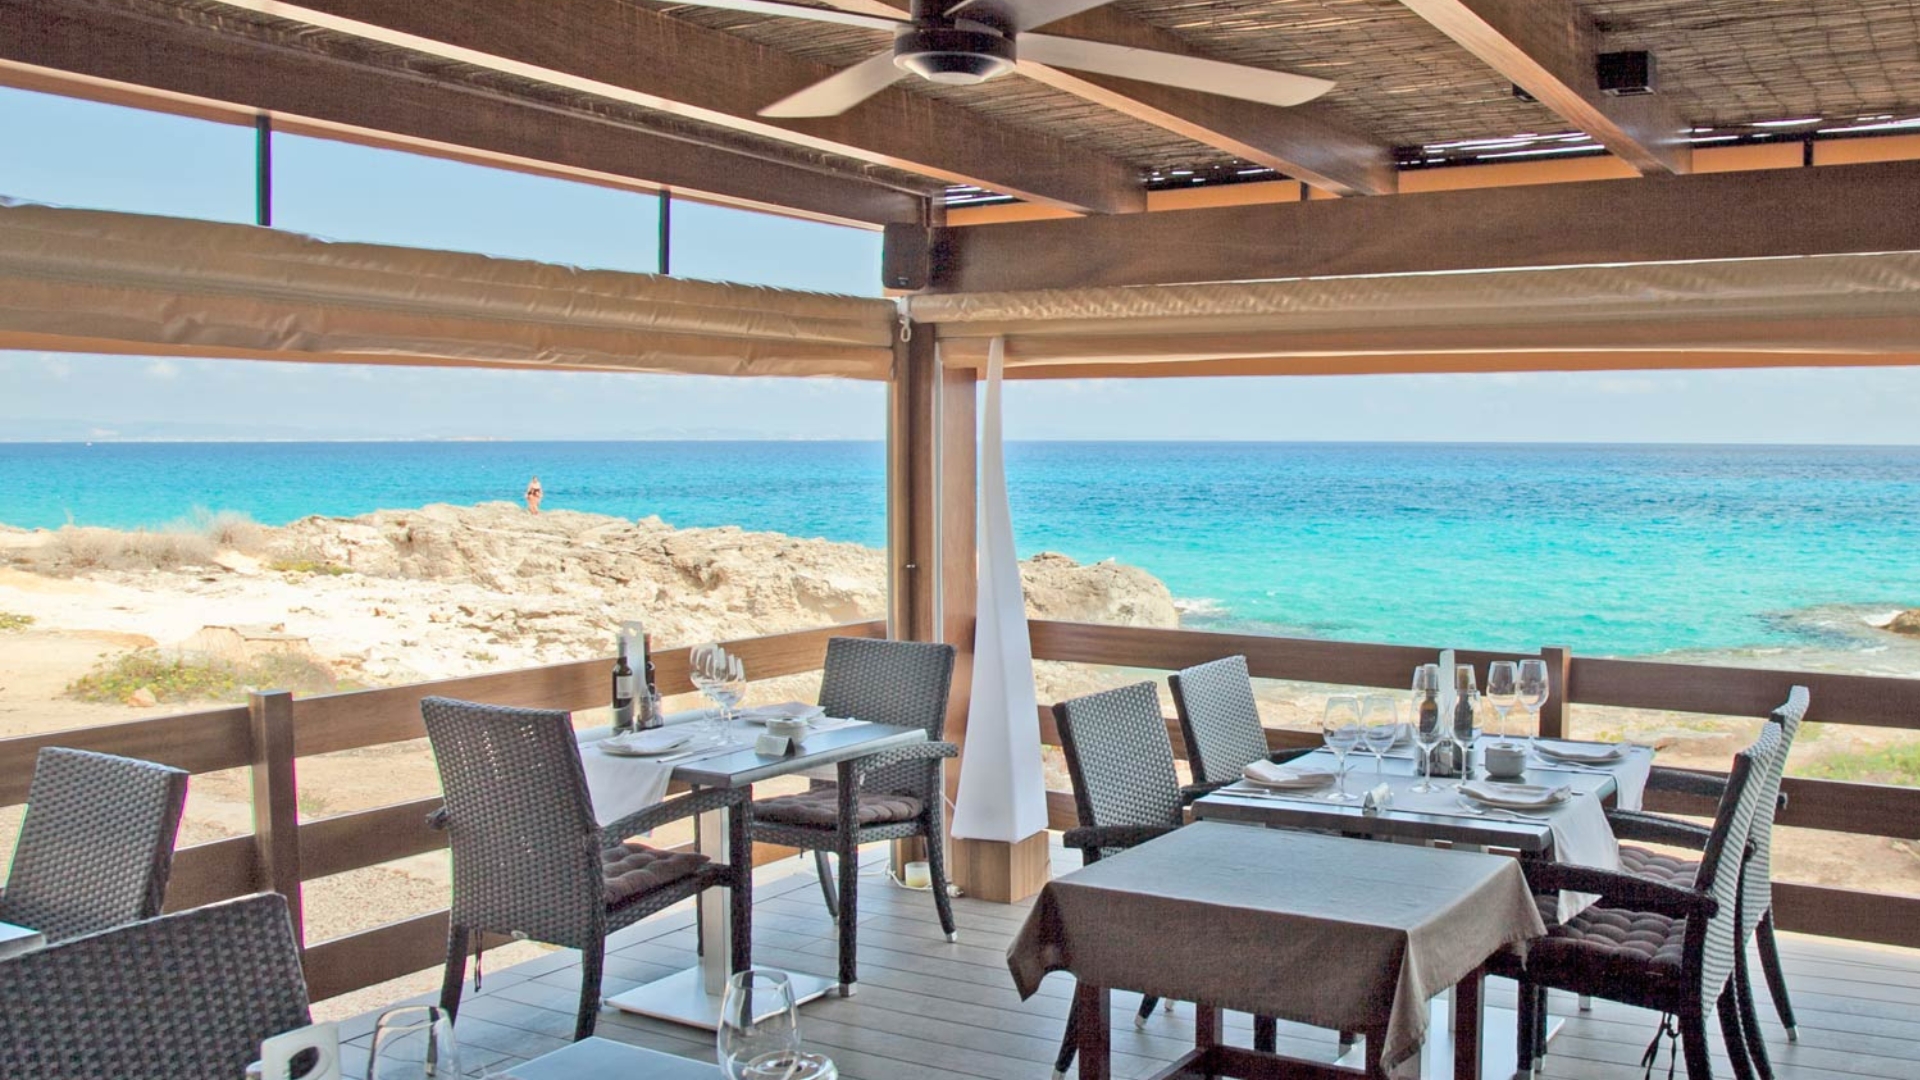 Visit the best restaurants in the Balearics during your yacht charter